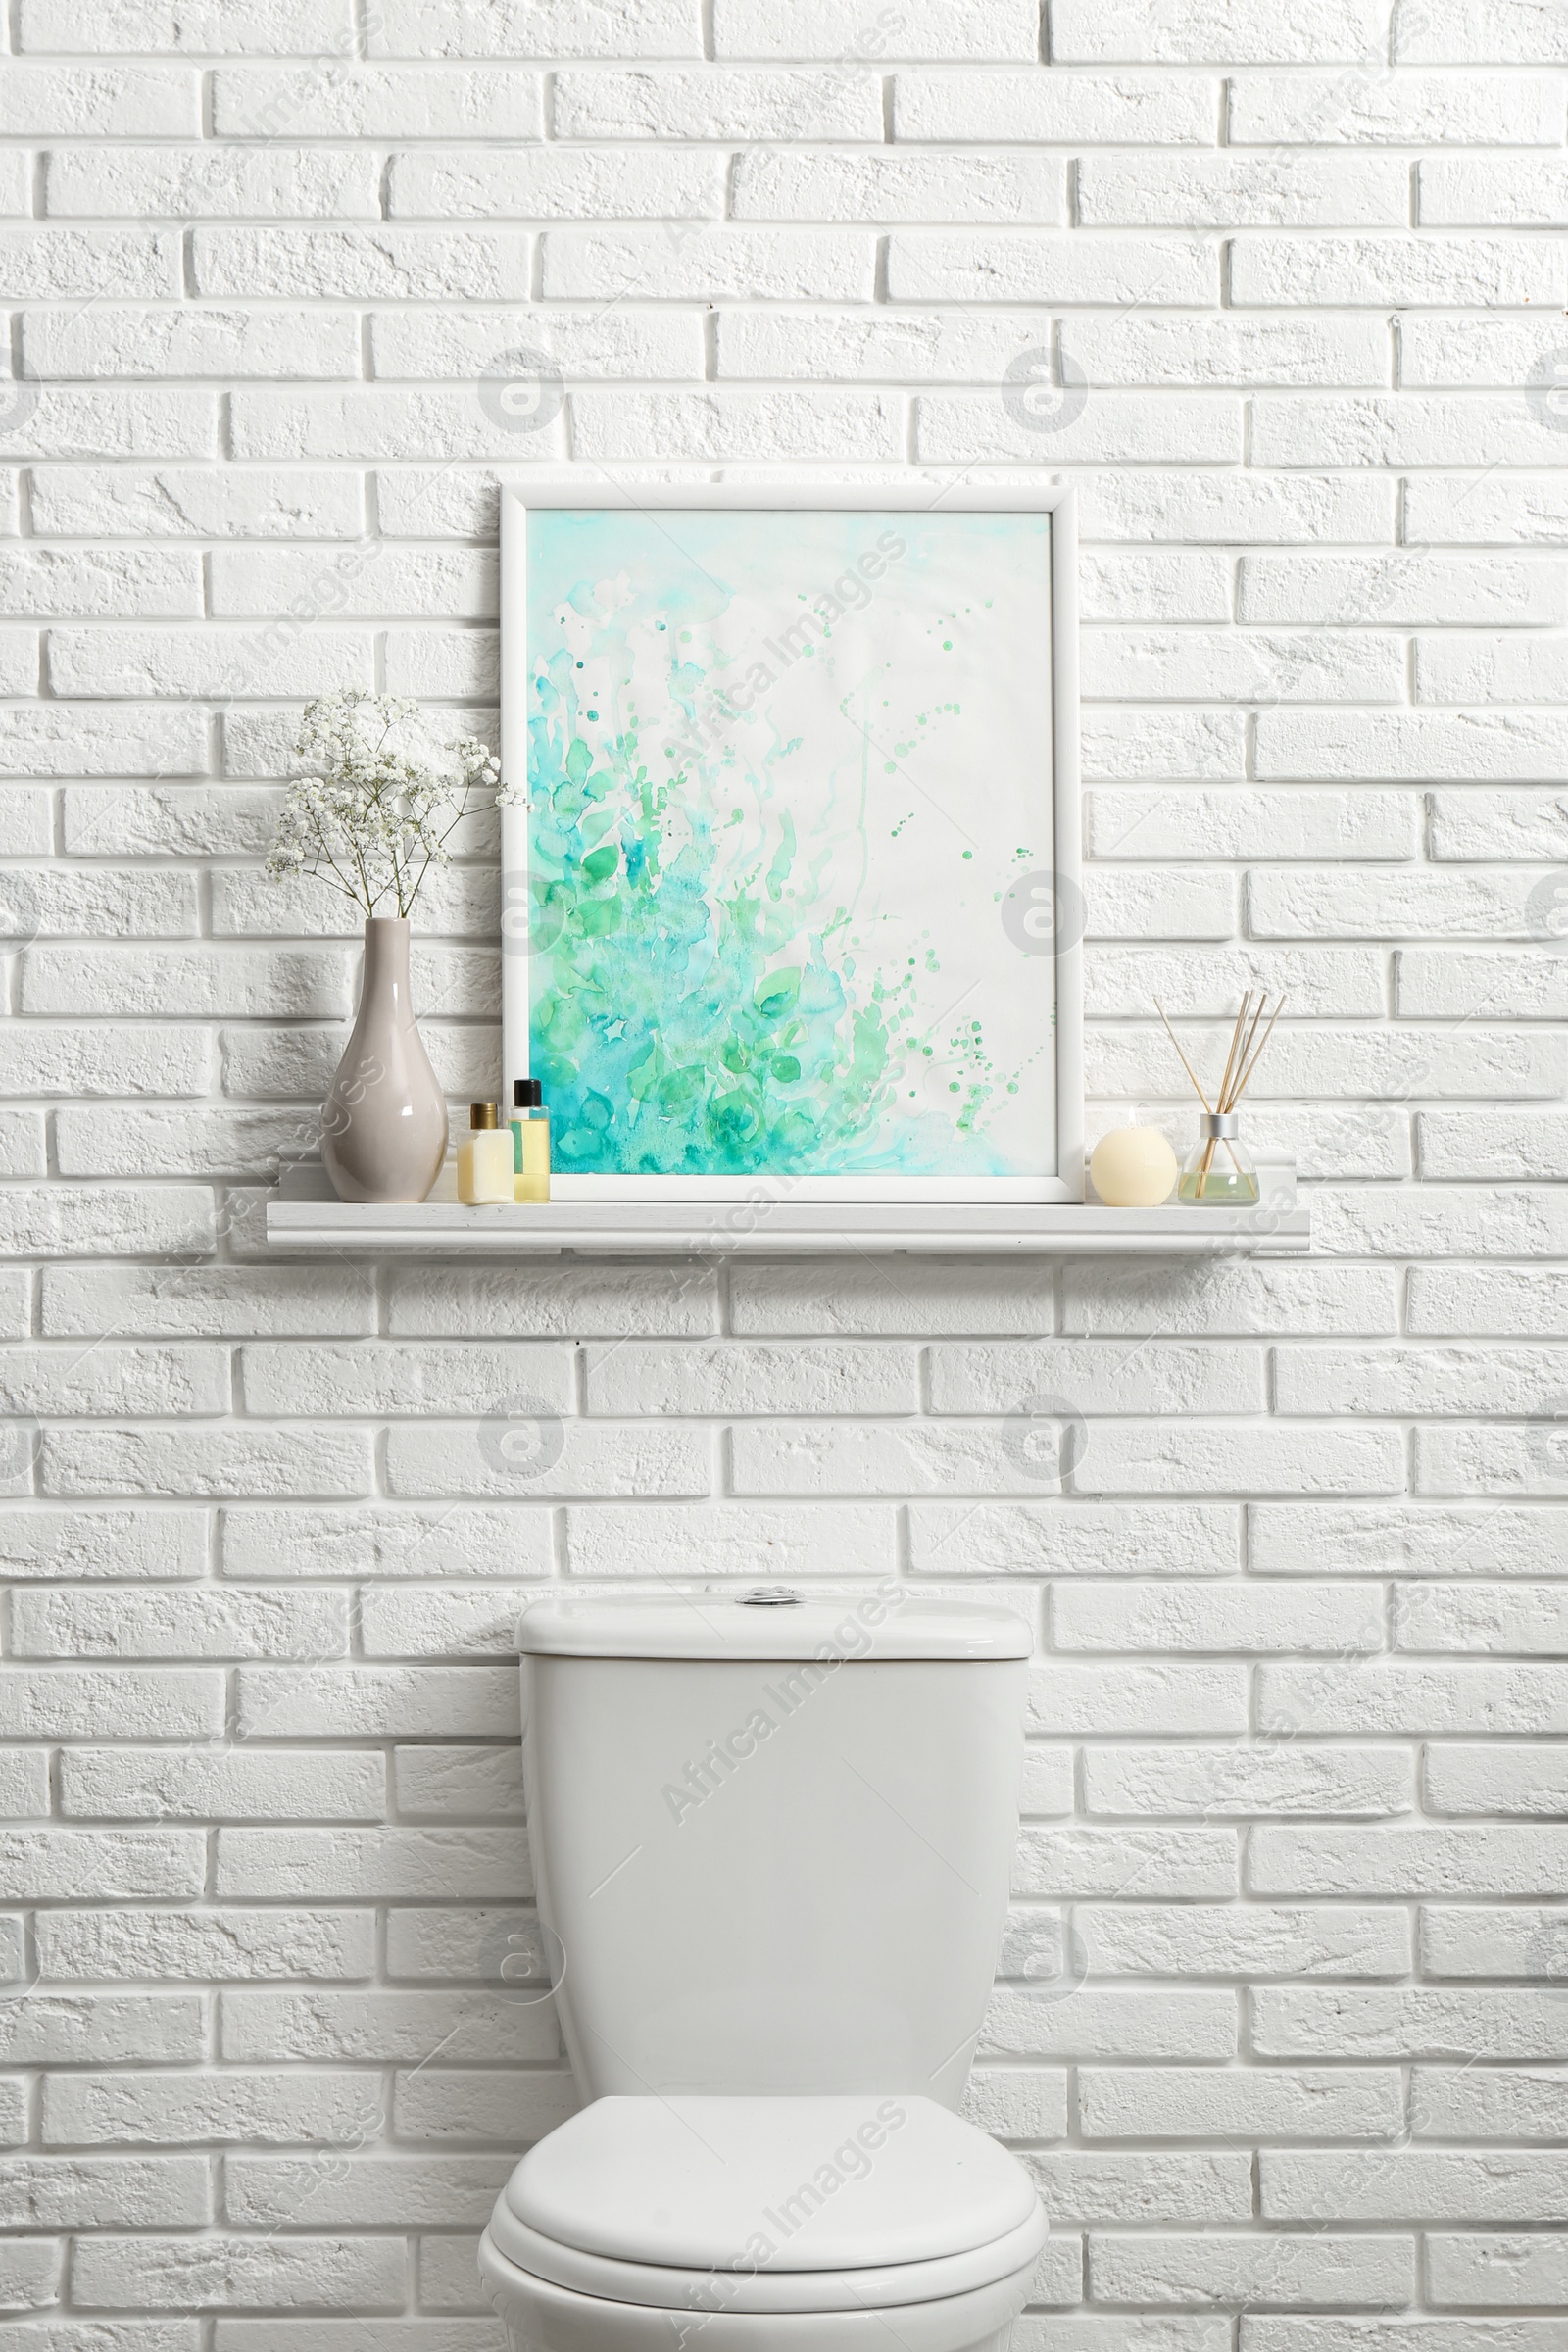 Photo of Shelf with picture on white brick wall above toilet bowl in restroom interior